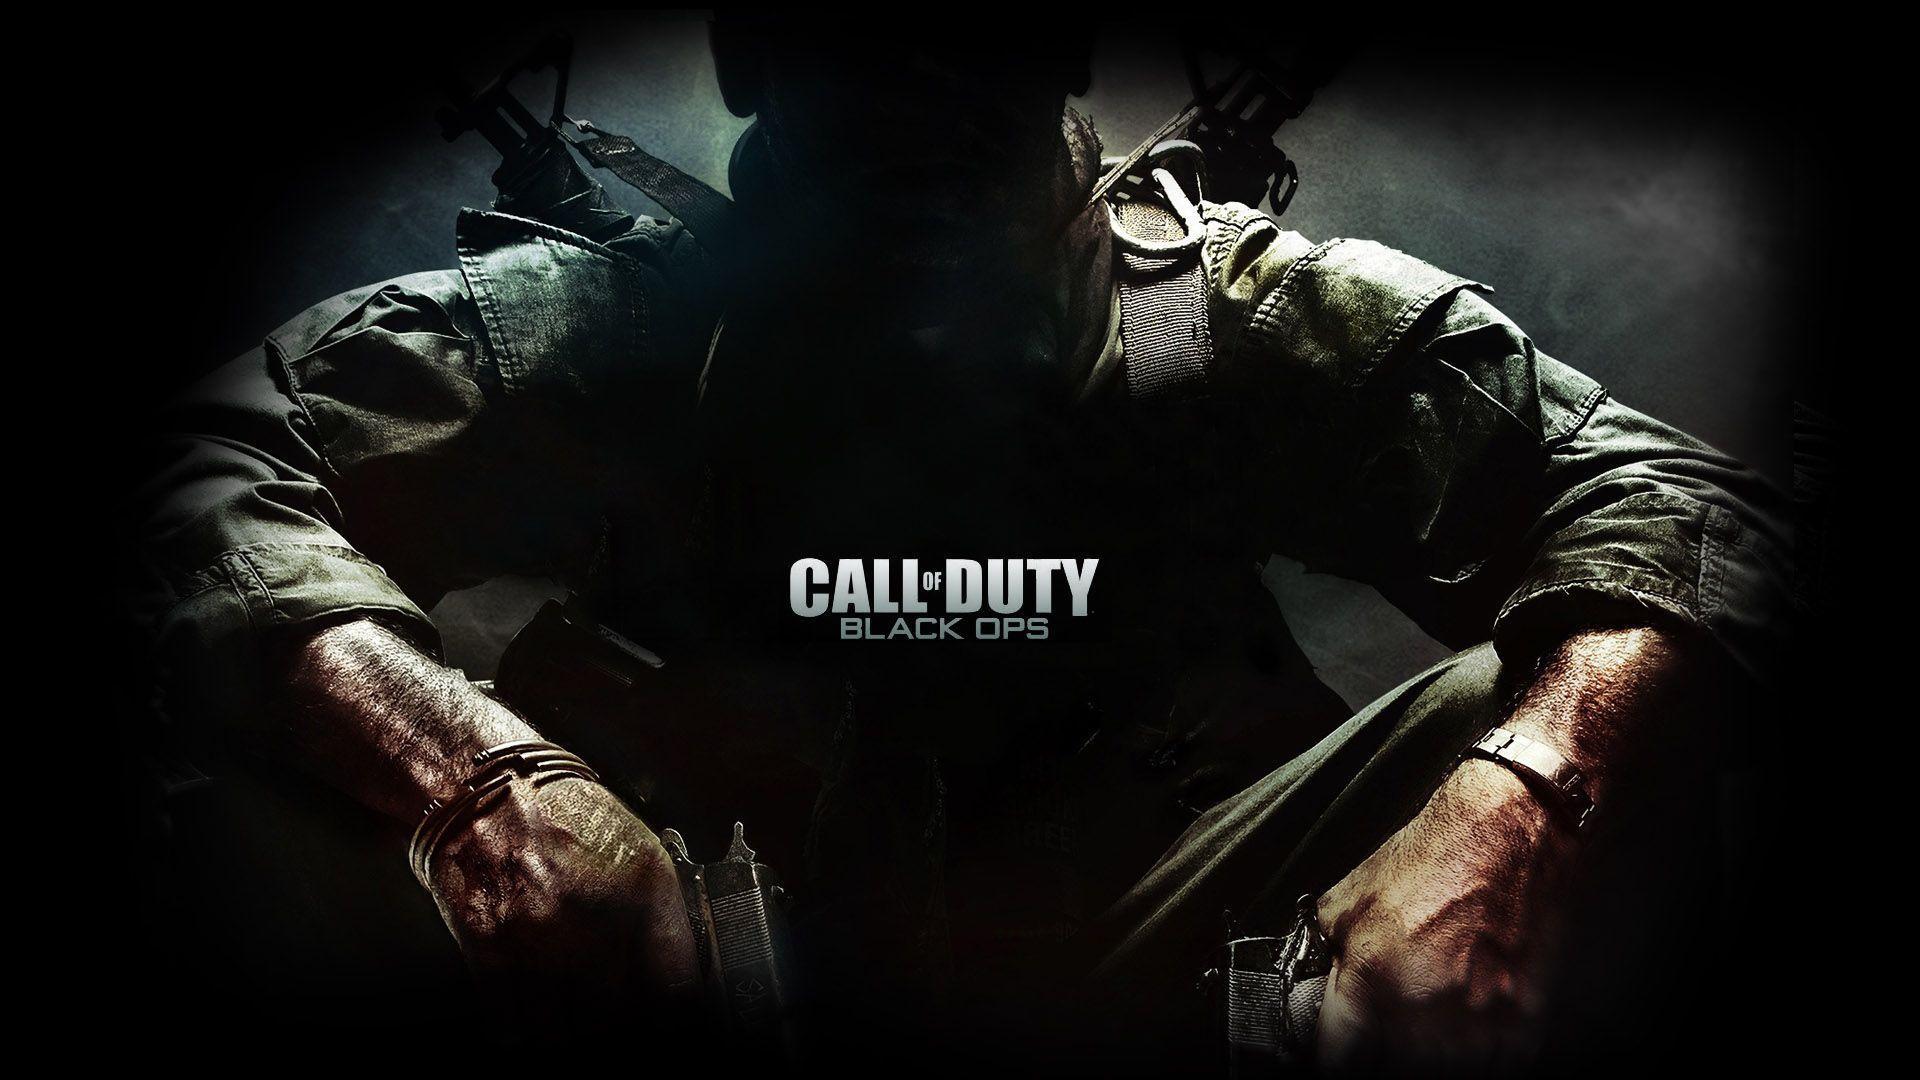 Call of Duty Black Ops HD Wallpapers